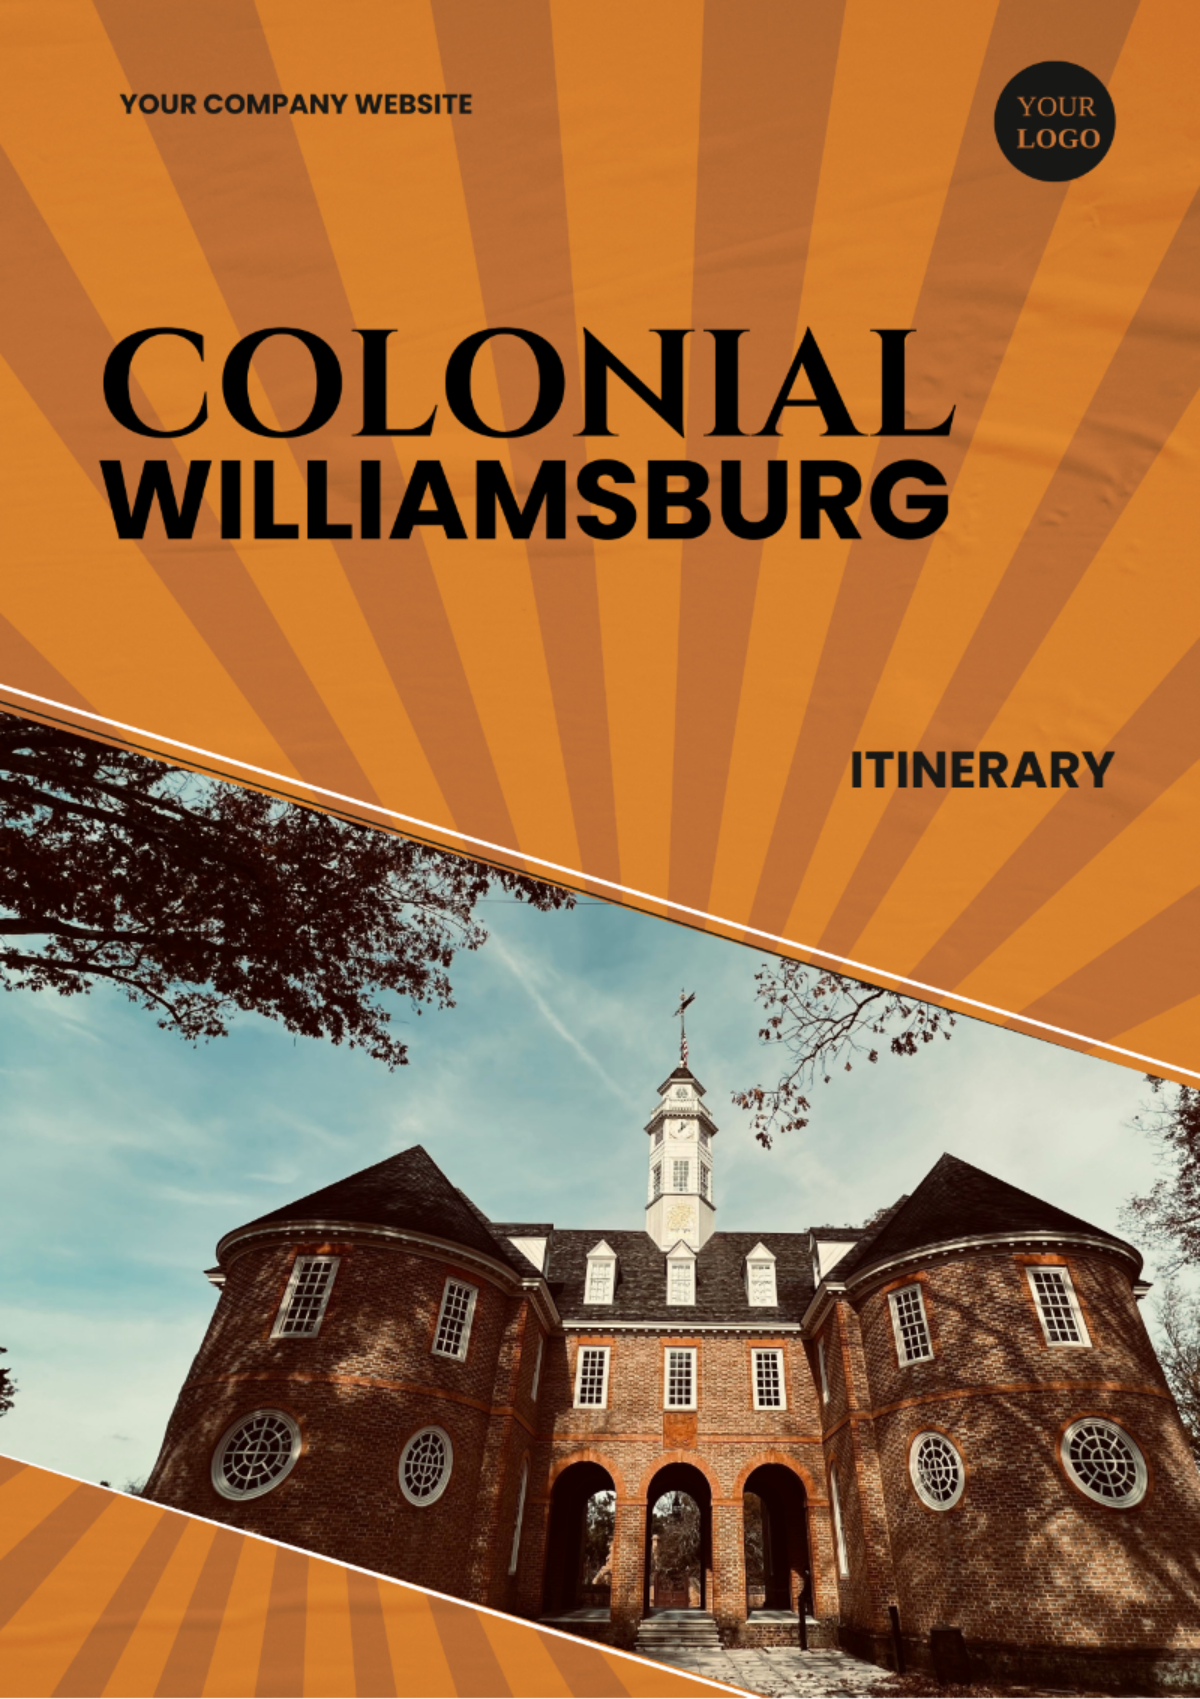 Colonial Williamsburg Itinerary Template